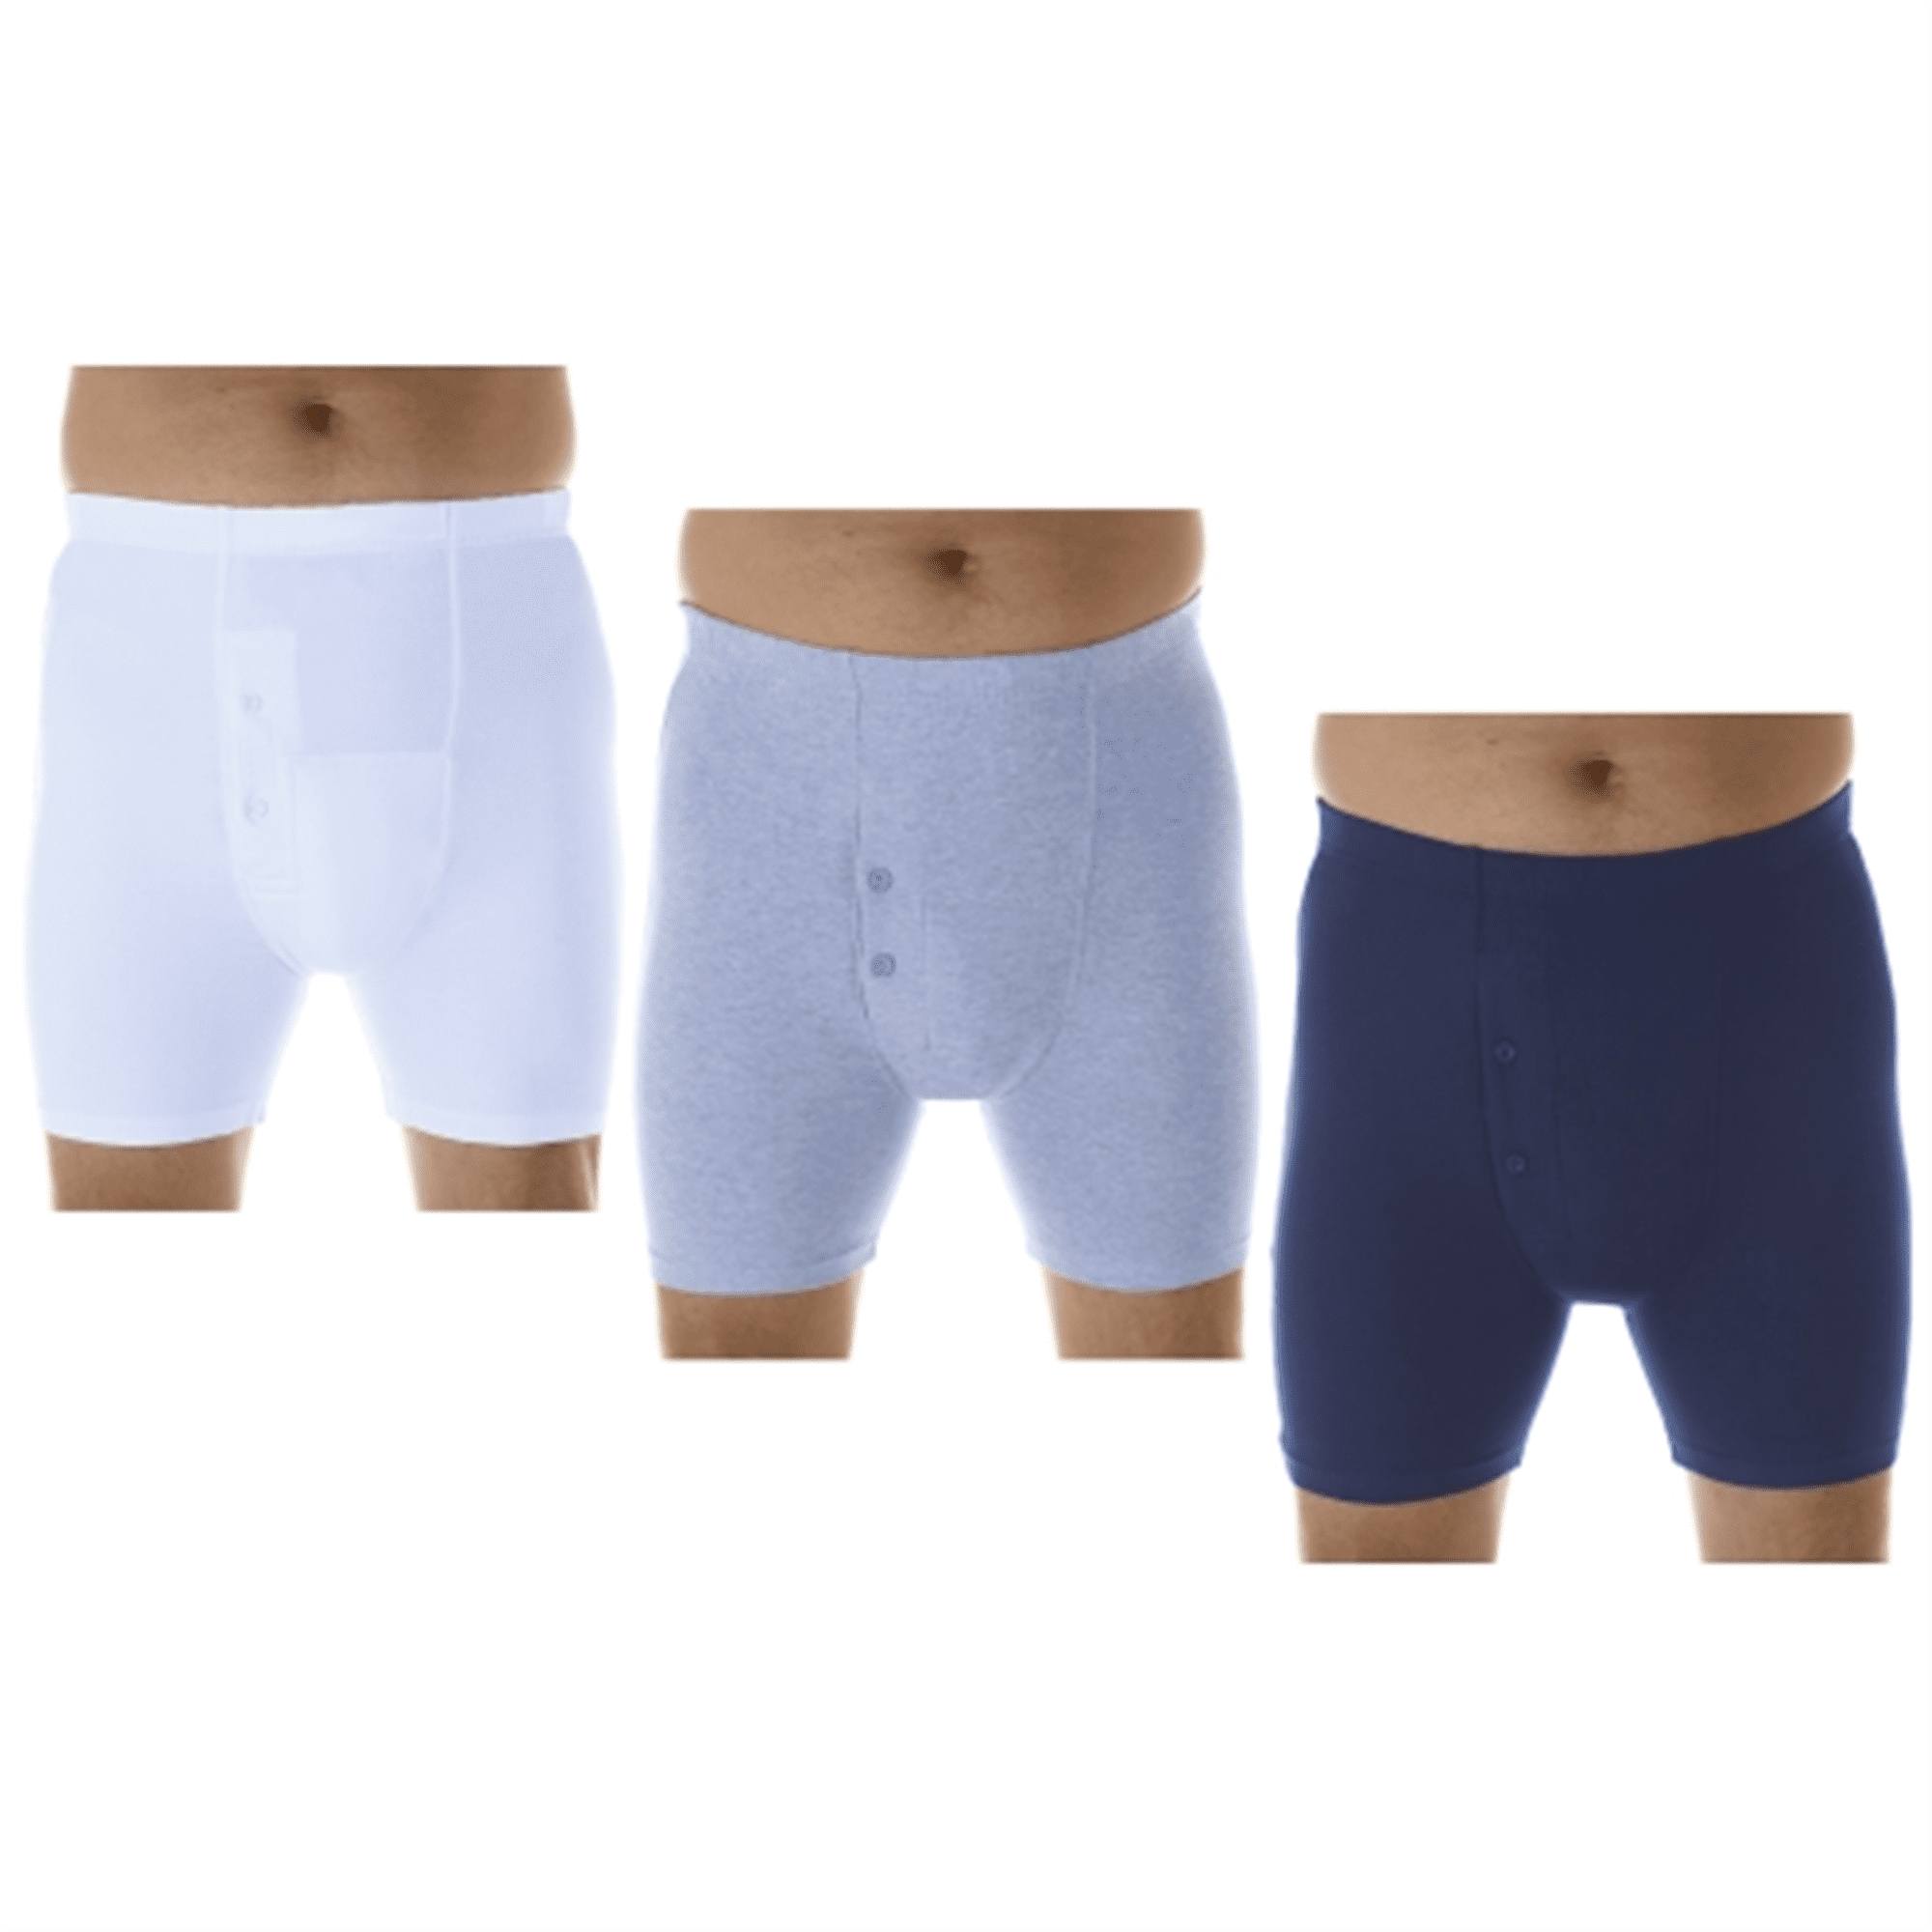 Wearever Mens Incontinence Underwear Washable Nepal